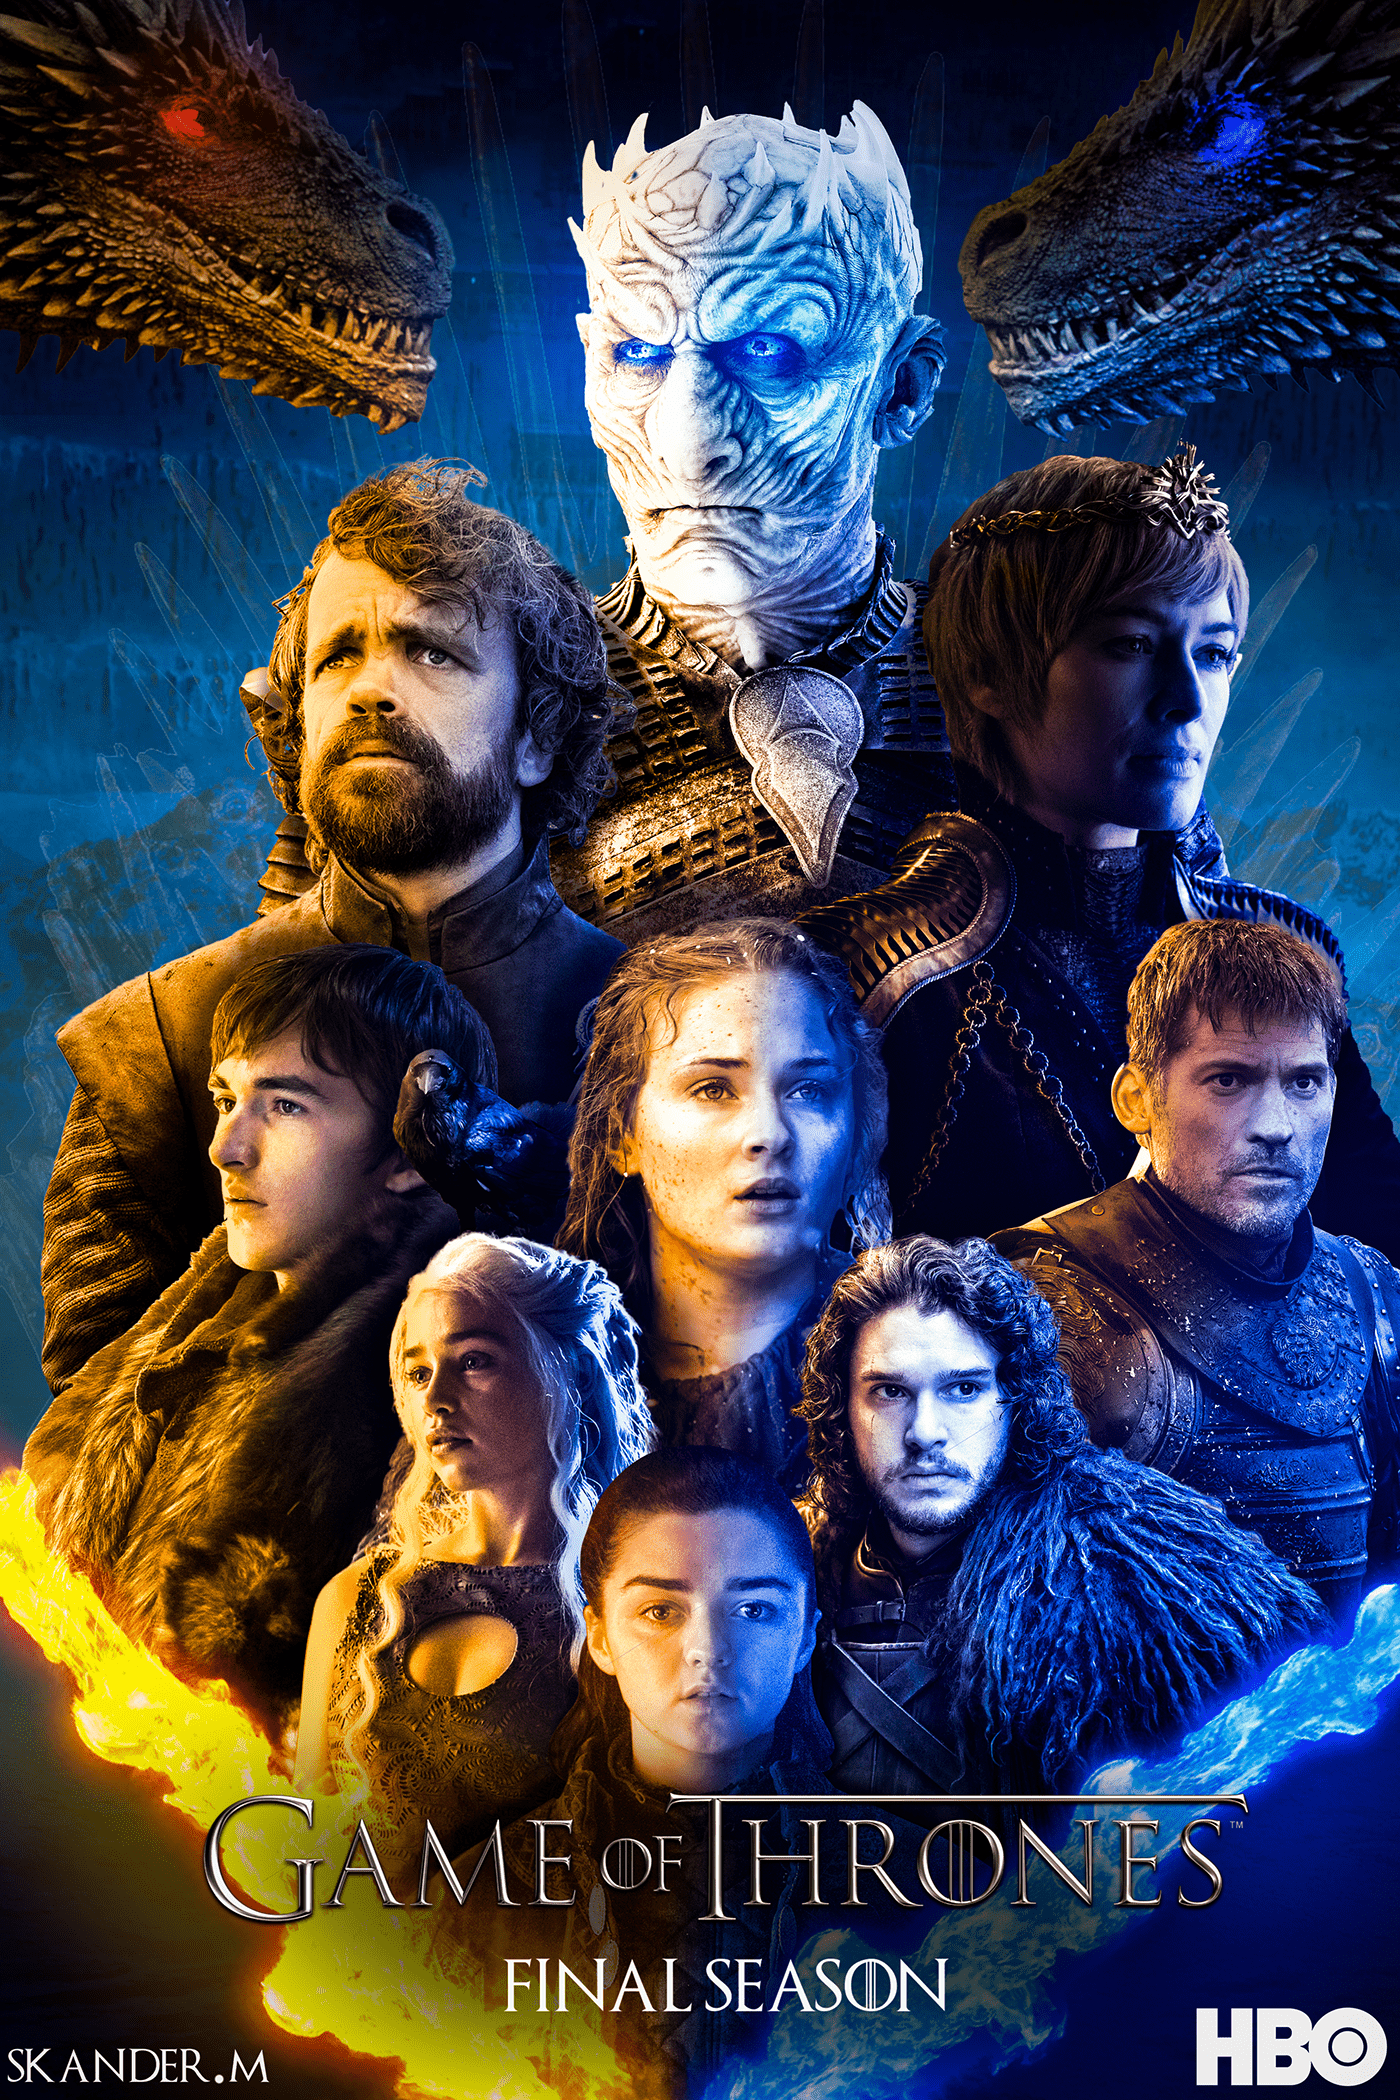 Game of Thrones Poster Design movie poster photoshop high quality professional artwork